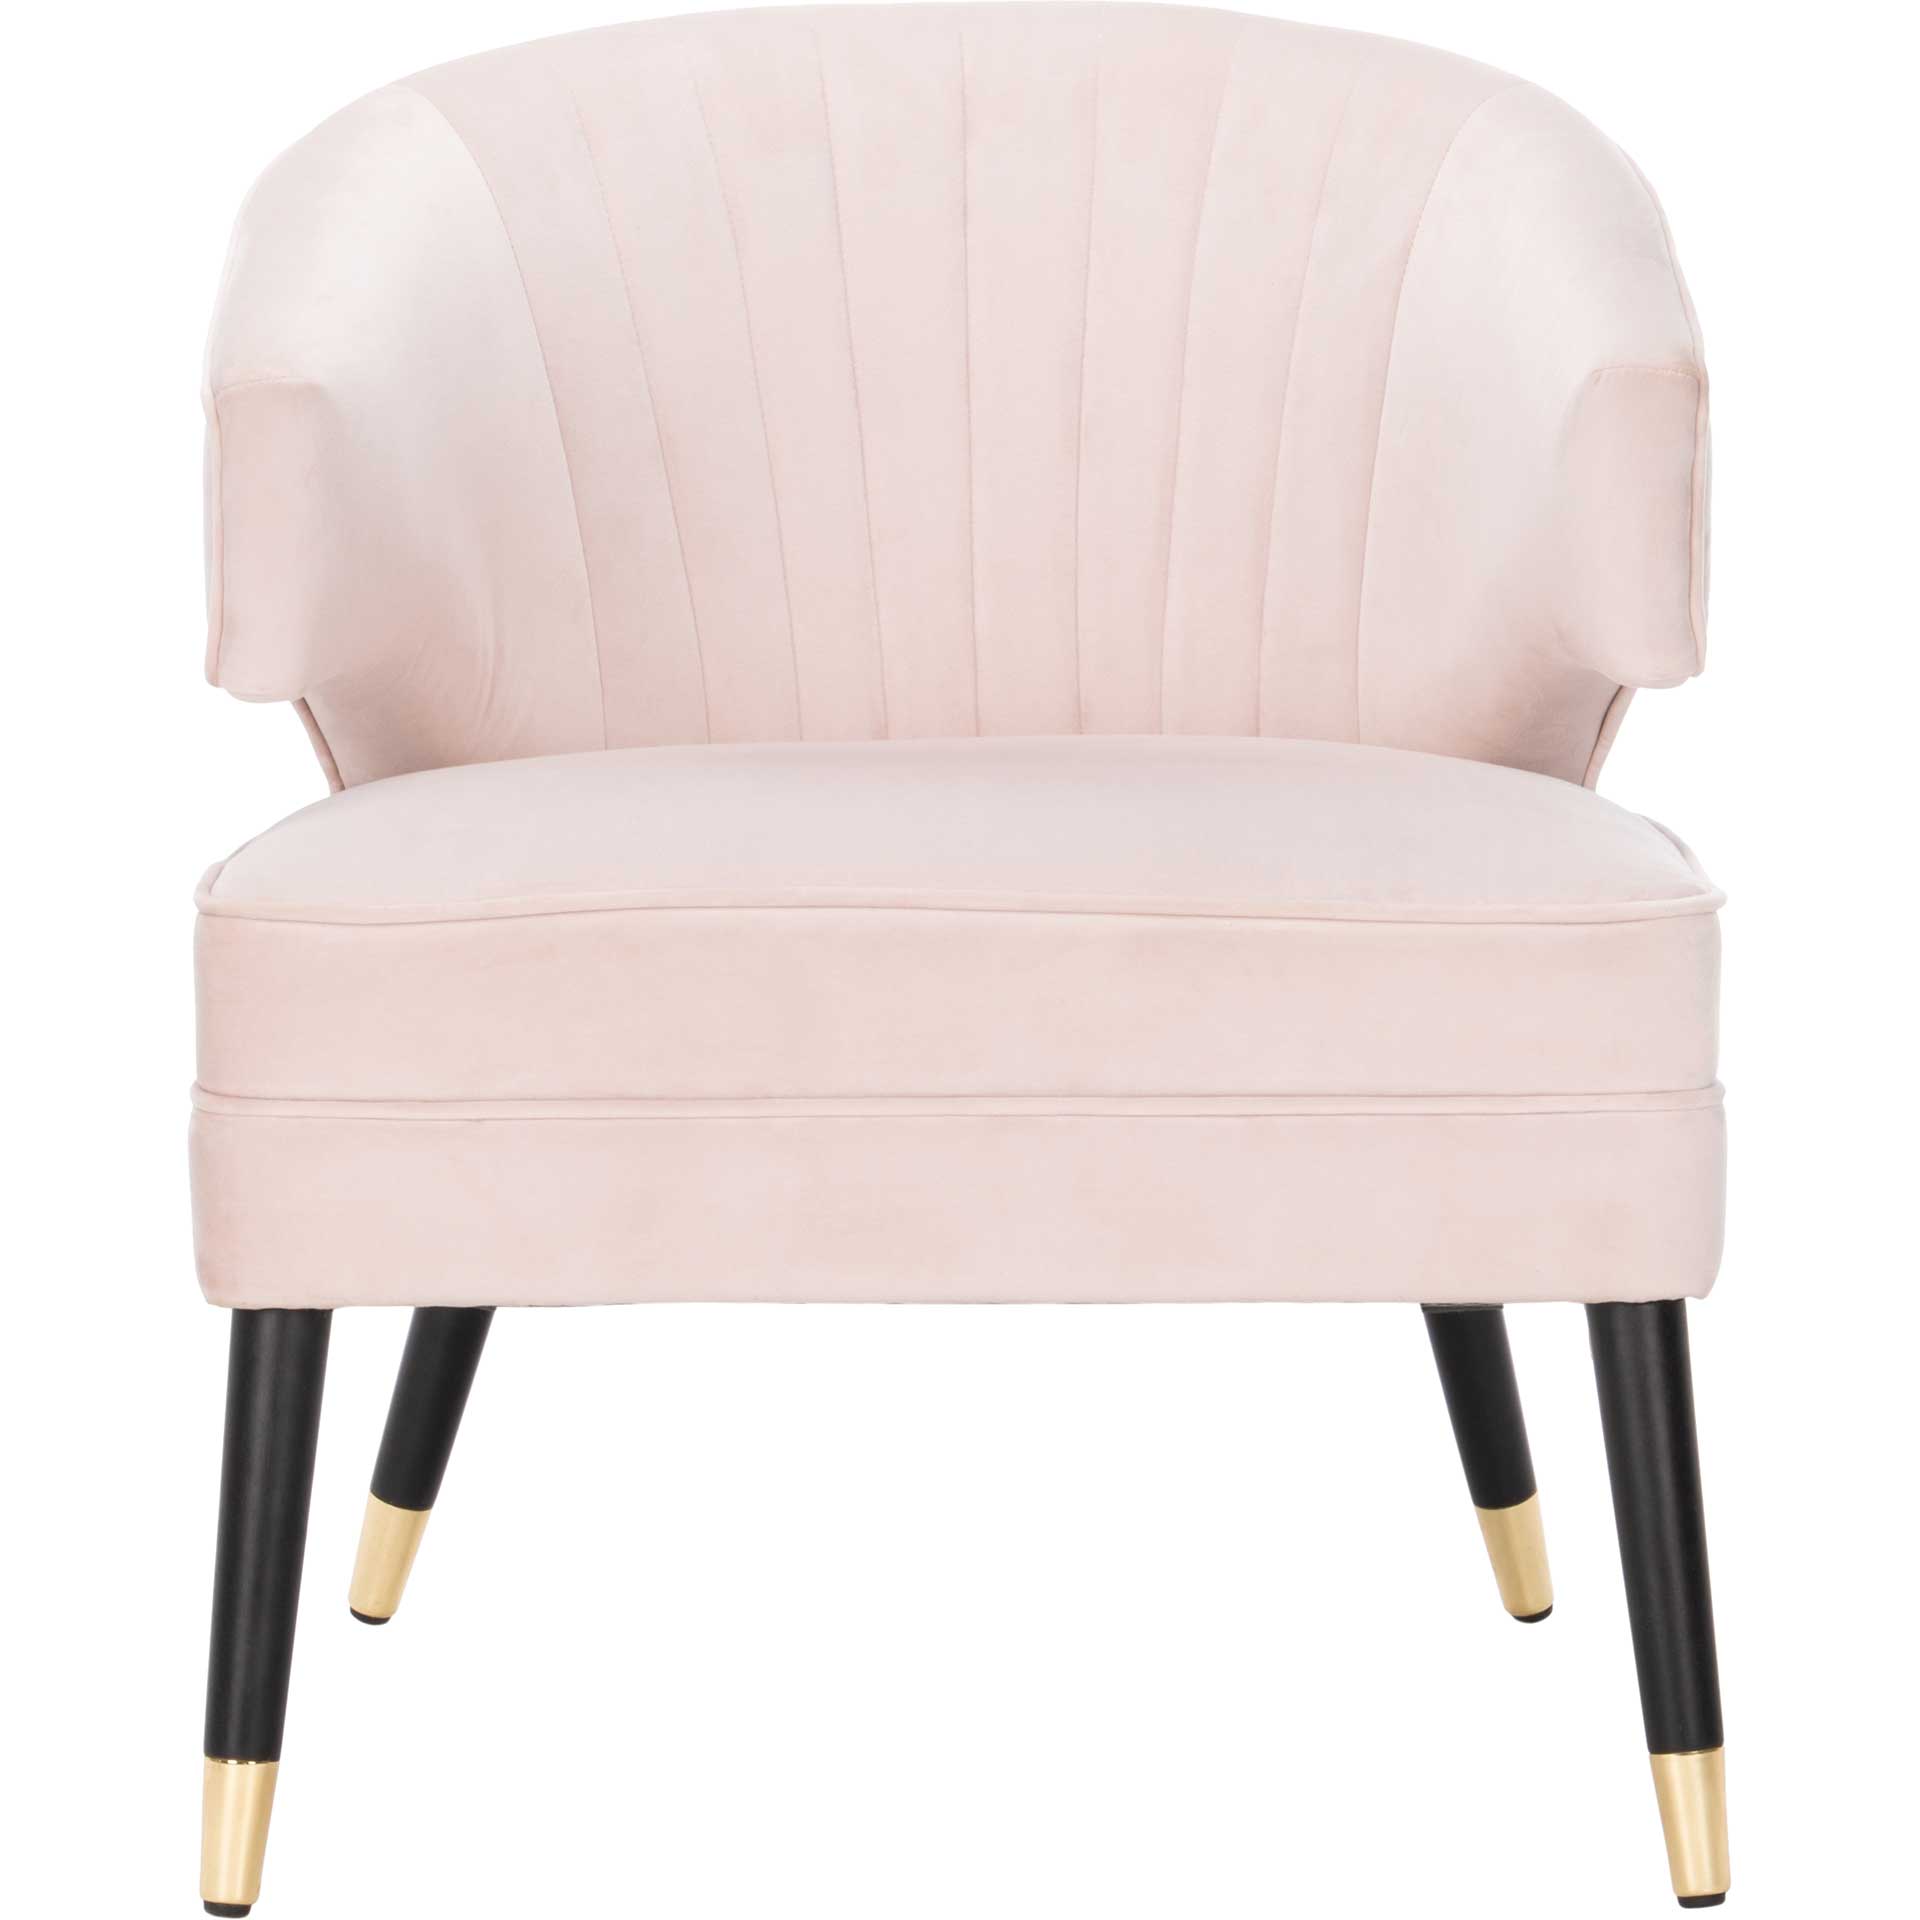 Stitch Wingback Accent Chair Pale Pink/Black